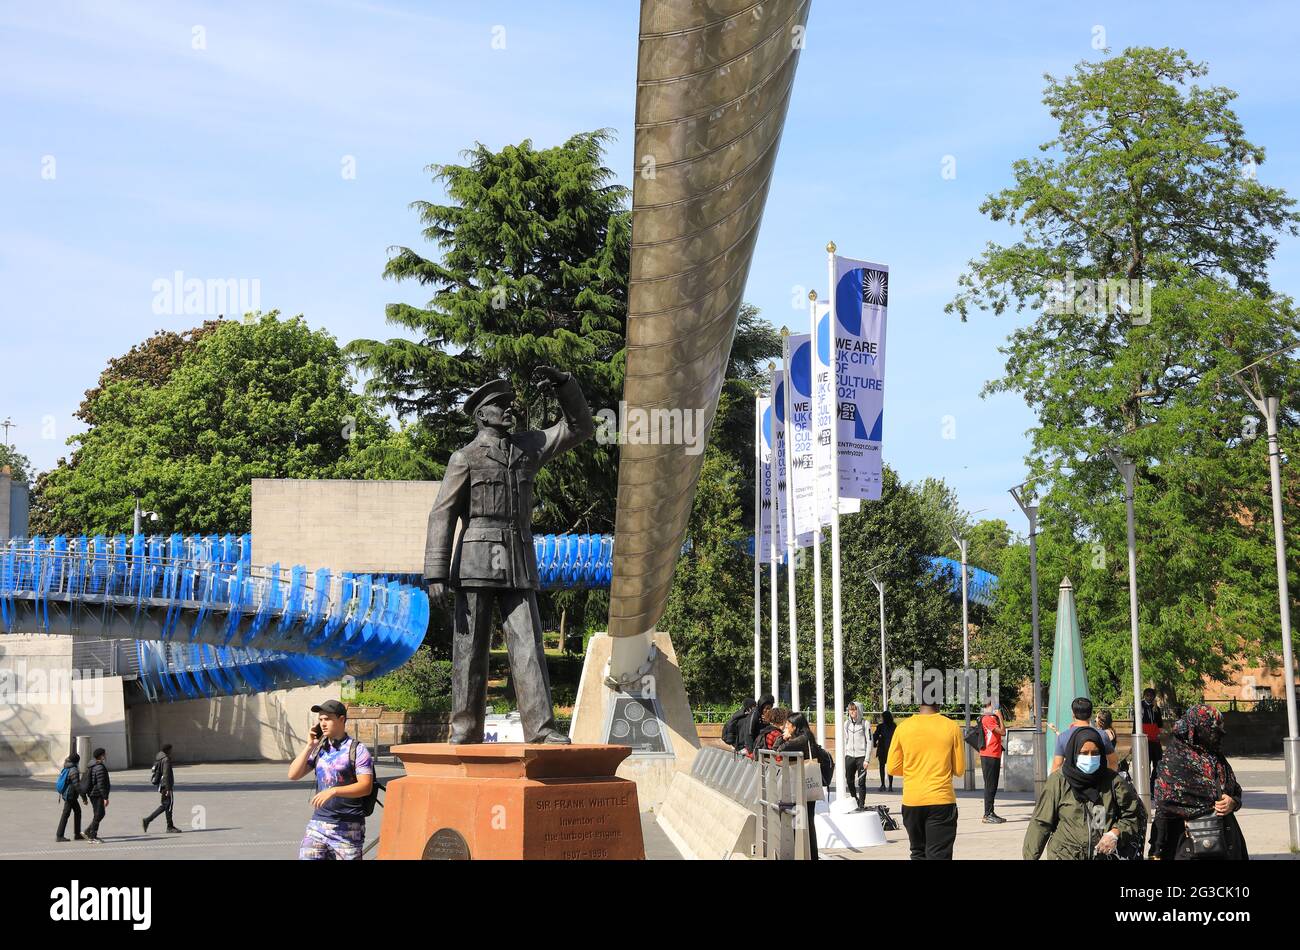 Statue of Sir Frank Whittle, inventor of the turbojet engine, under the Whittle Arch in multicultural  UK City of Culture 2021, Coventry, Warwickshire Stock Photo